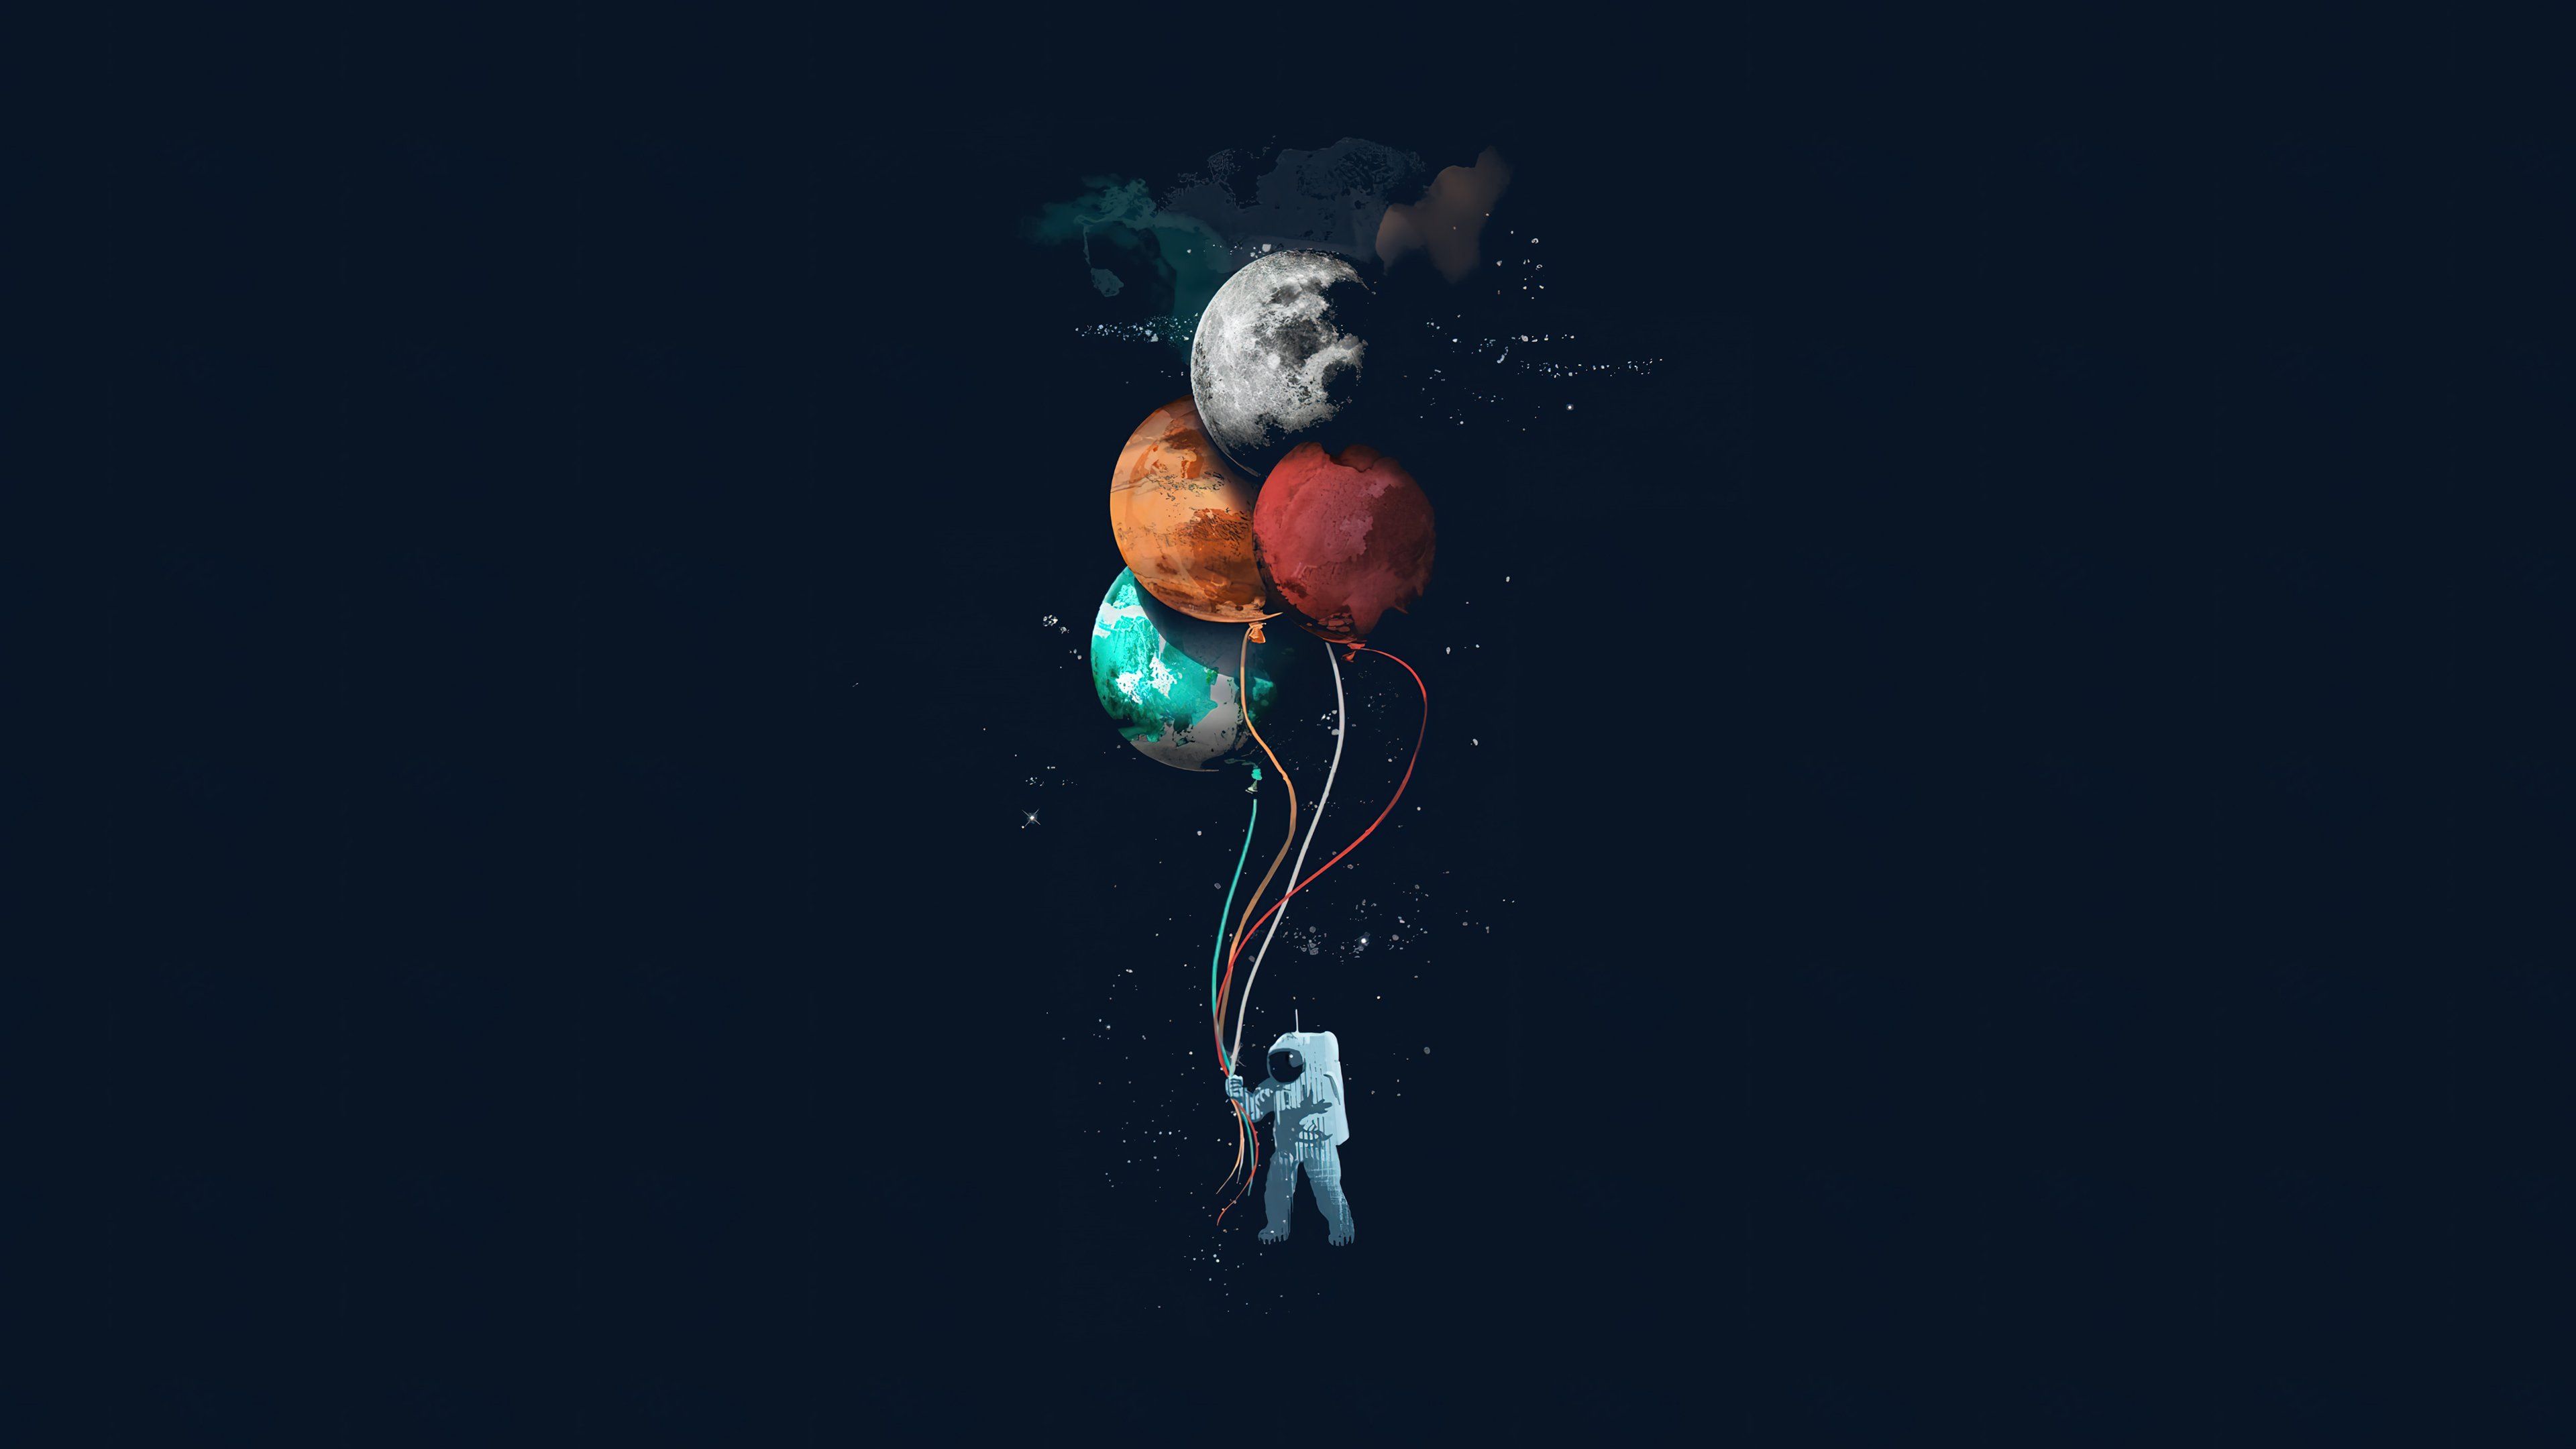 Astronaut with planets as balloons Wallpaper 4k Ultra HD